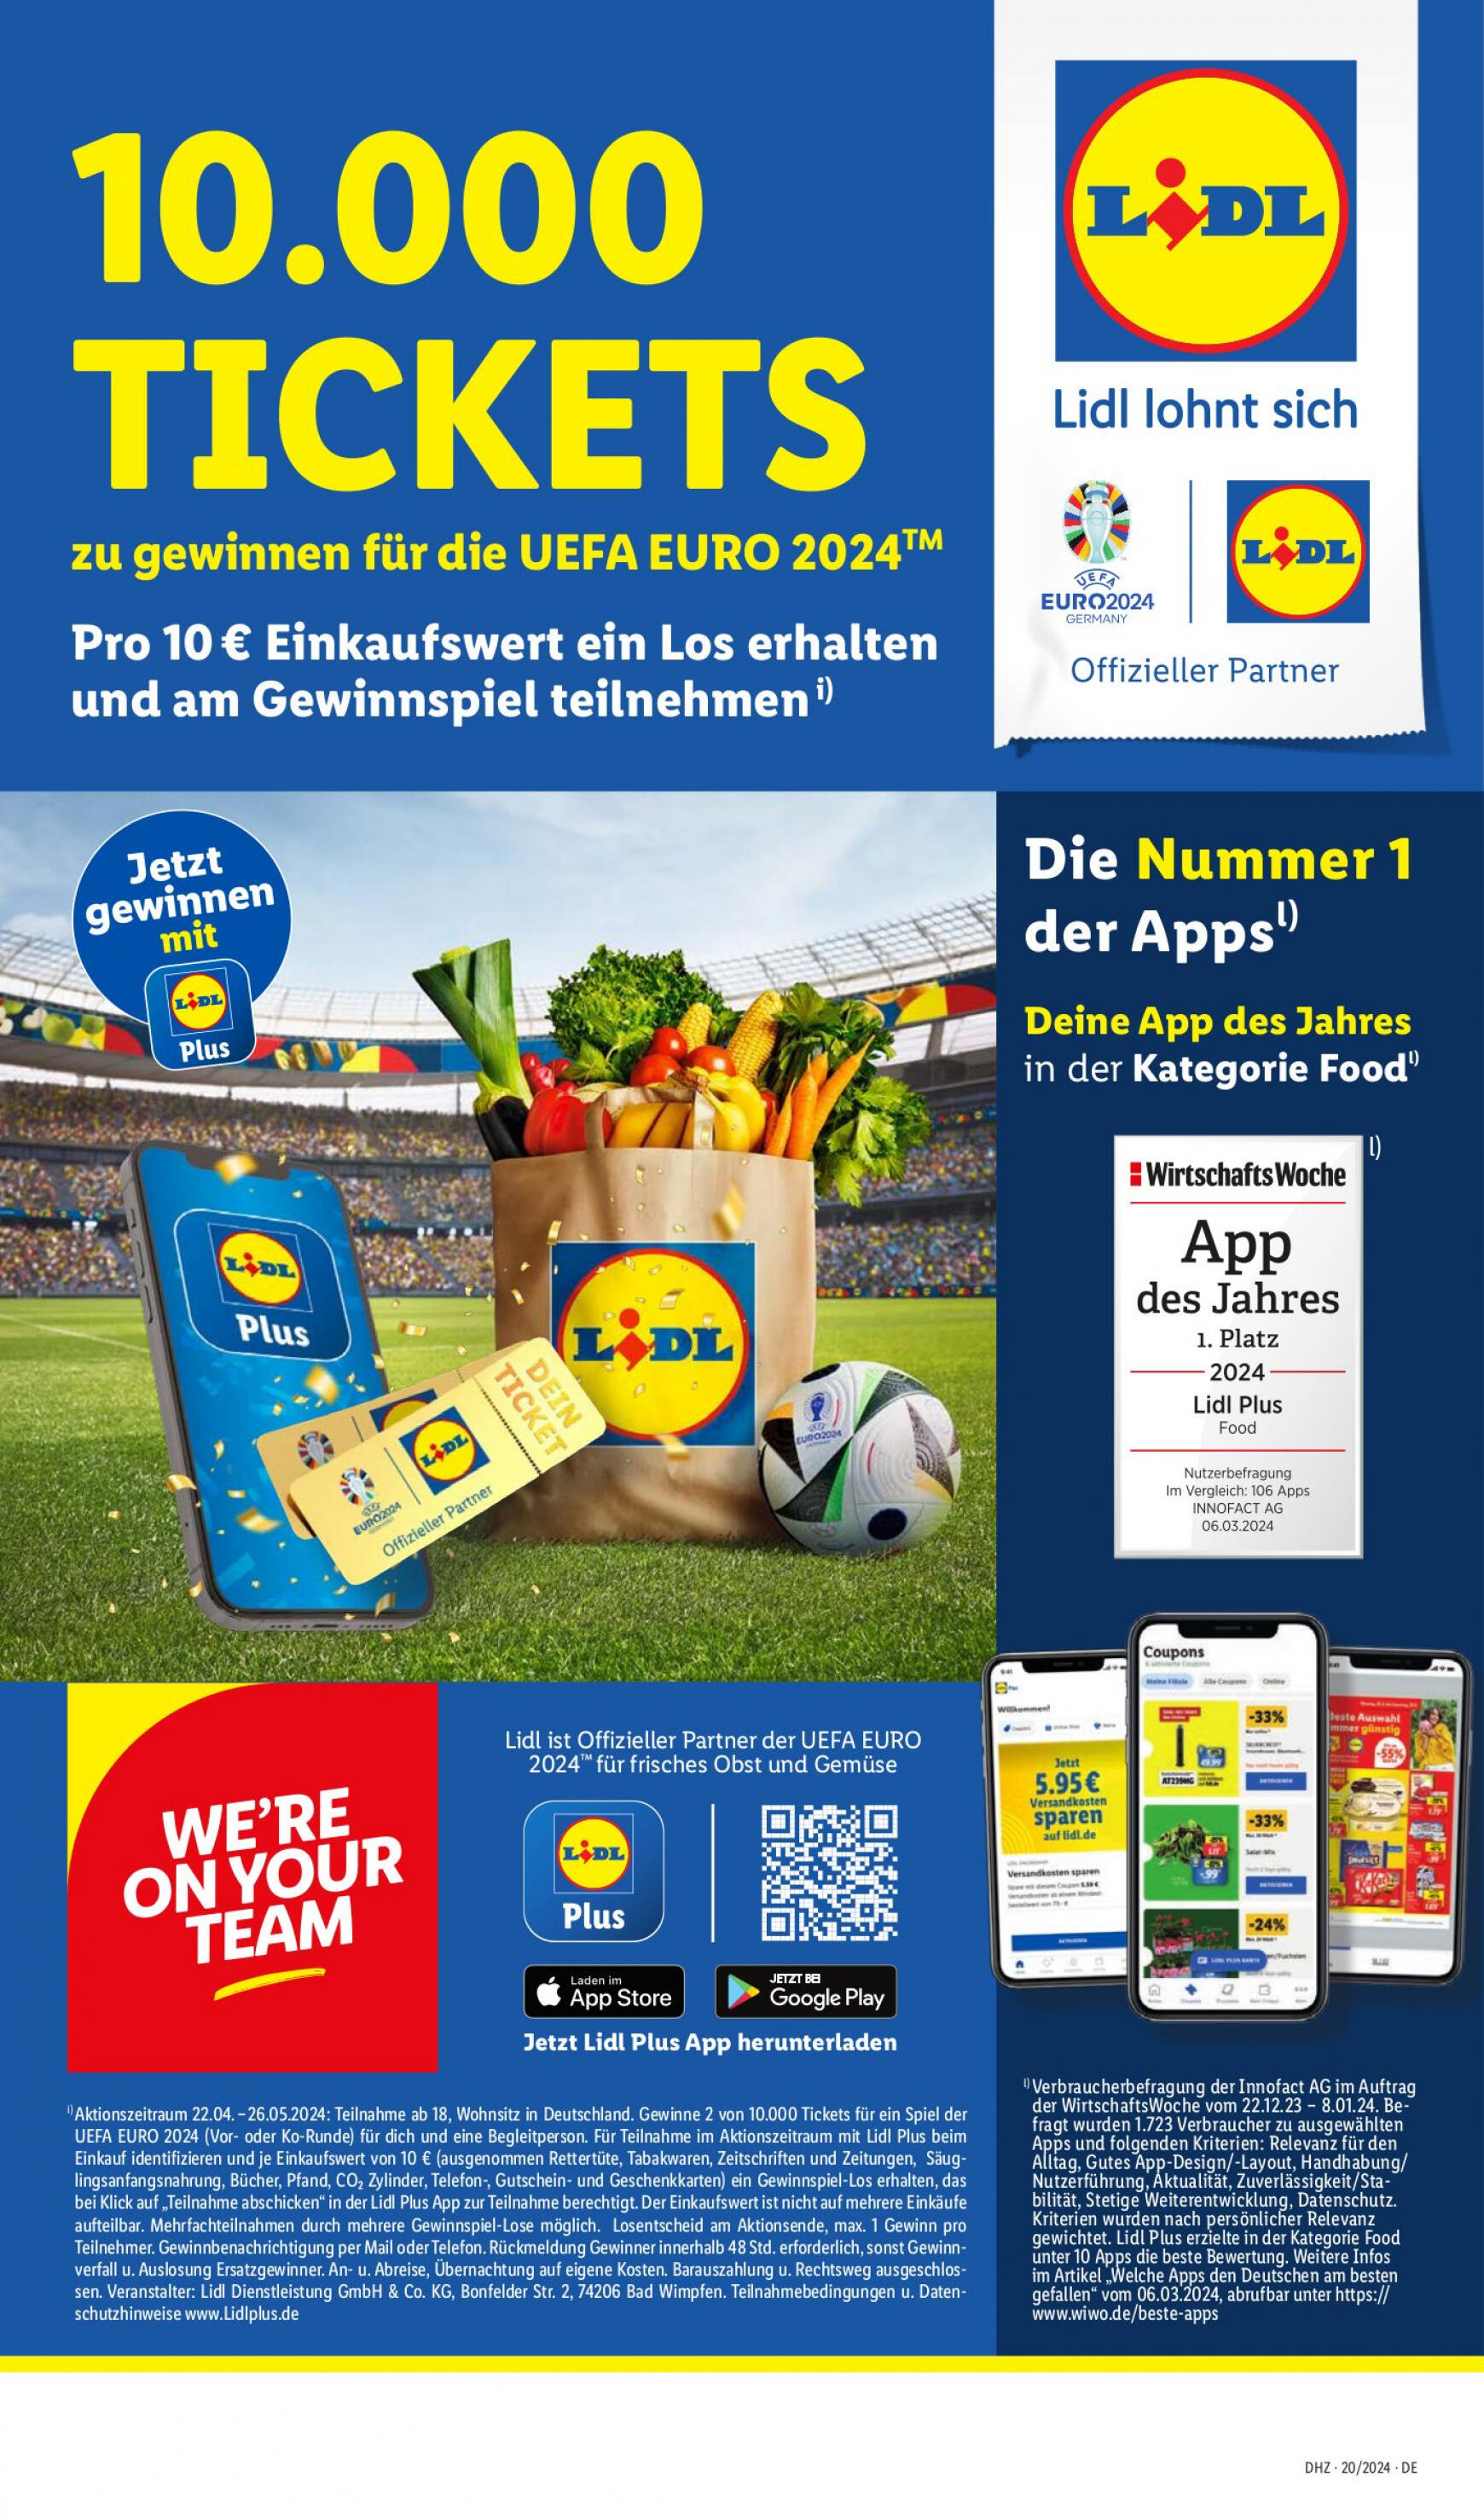 lidl - Flyer Lidl aktuell 13.05. - 18.05. - page: 62